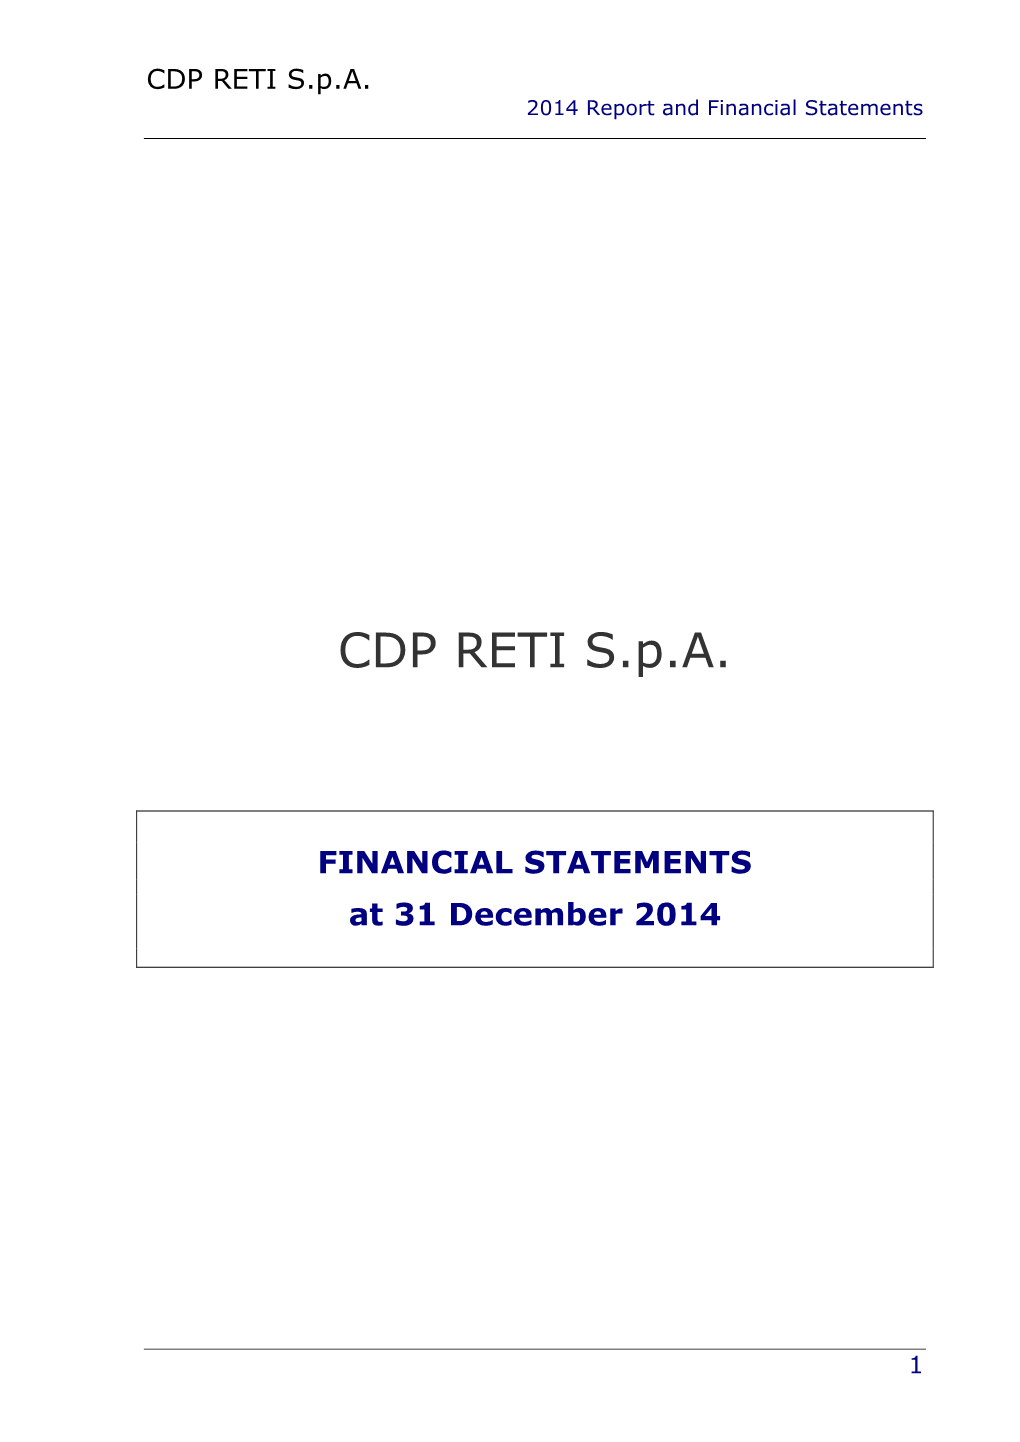 CDP RETI S.P.A. 2014 Report and Financial Statements